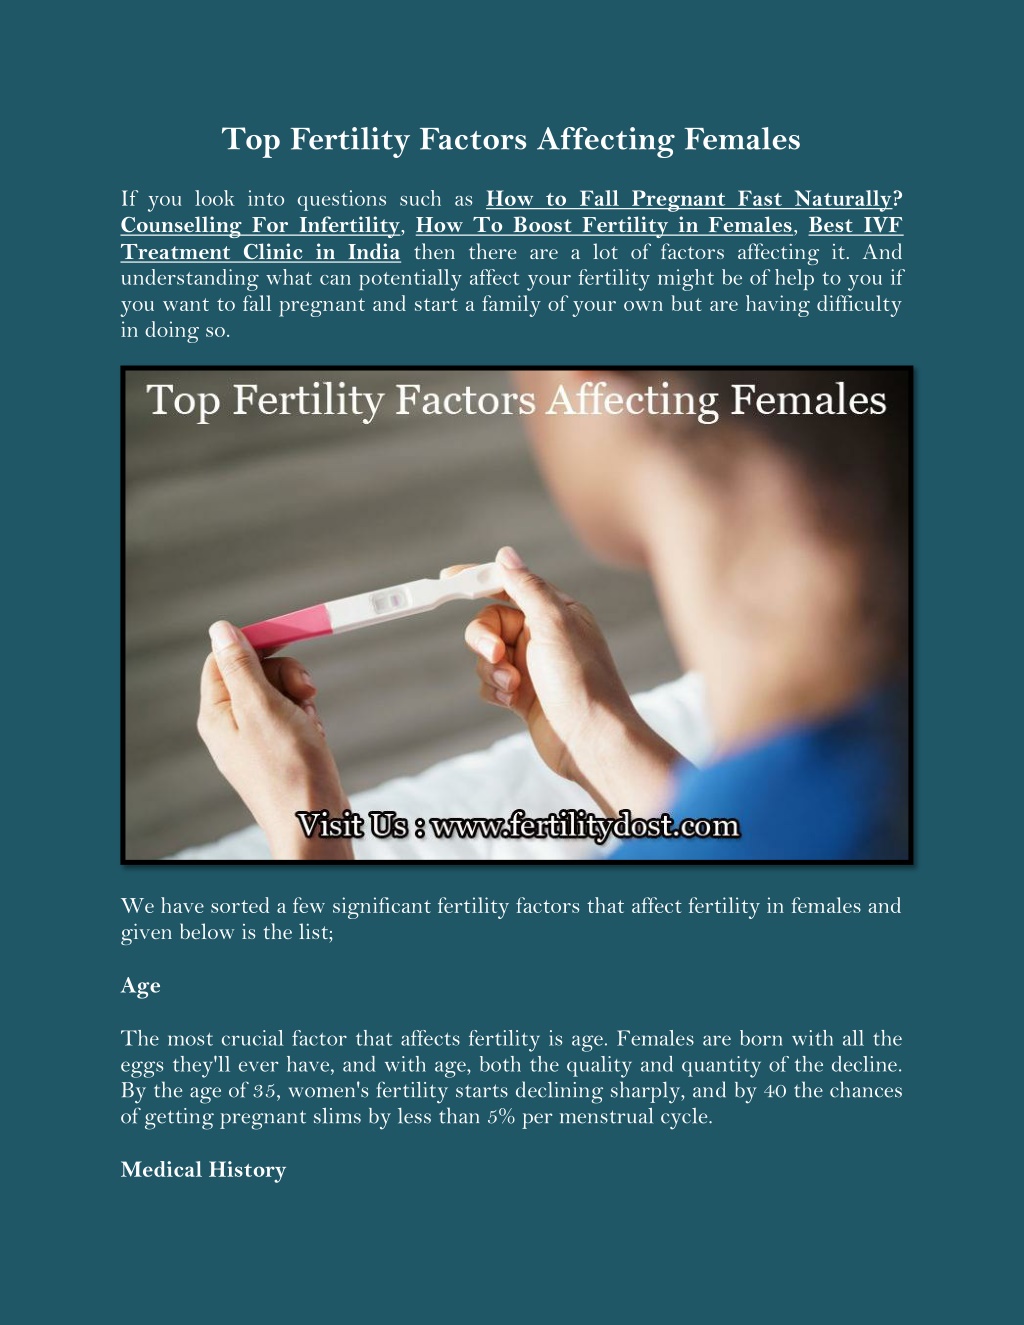 Ppt Top Fertility Factors Affecting Females Powerpoint Presentation Free Download Id10122676 5015